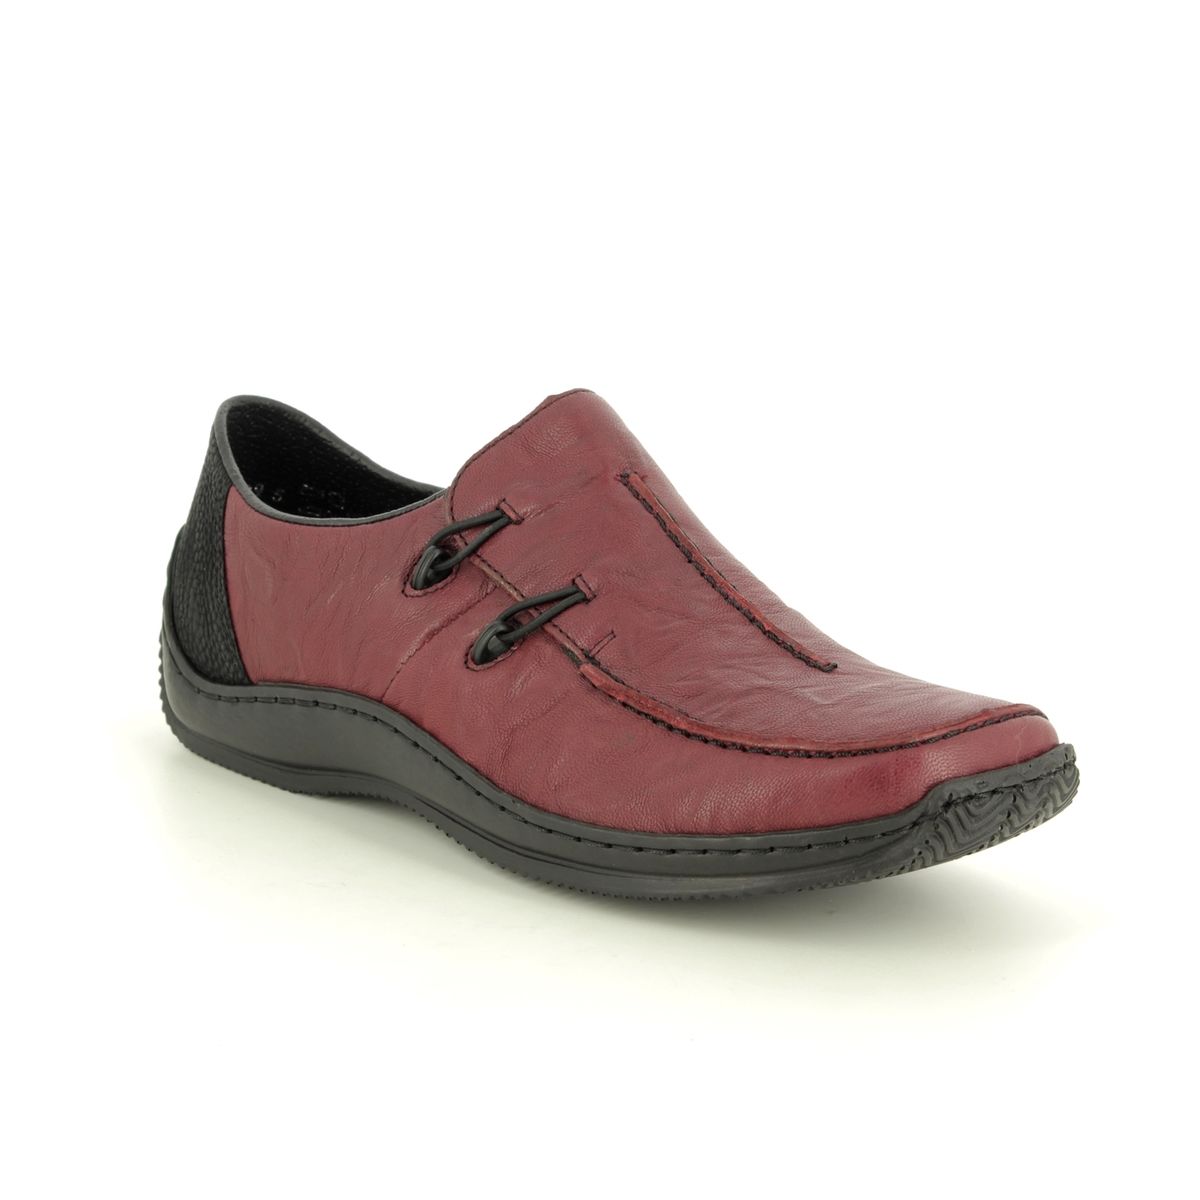 Rieker L1751-35 Wine leather Womens Comfort Slip On Shoes